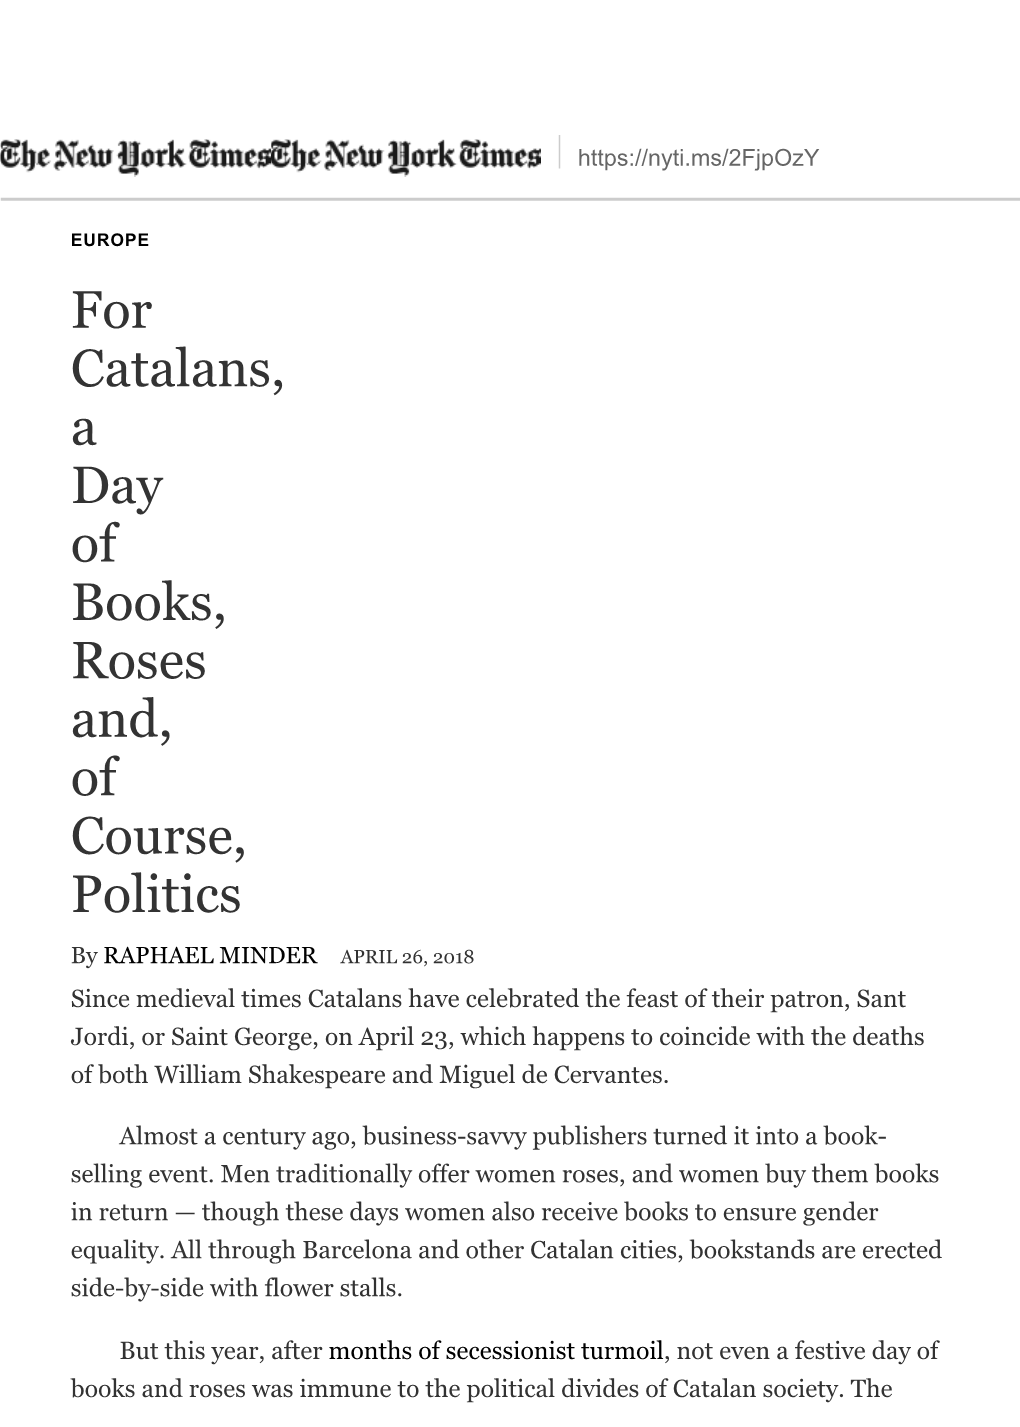 For Catalans, a Day of Books, Roses And, of Course, Politics